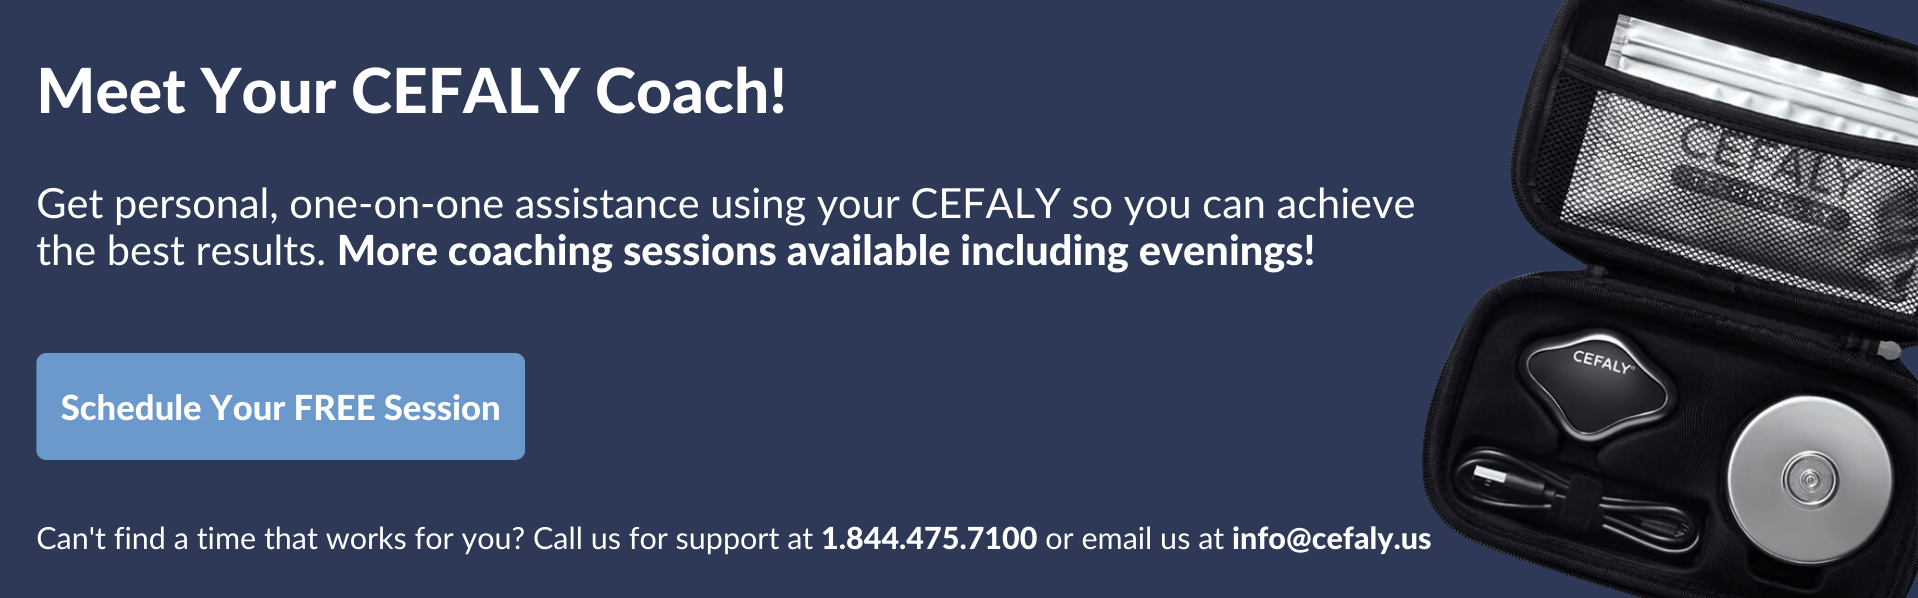 Meet your CEFALY Coach image, and link to schedule coach